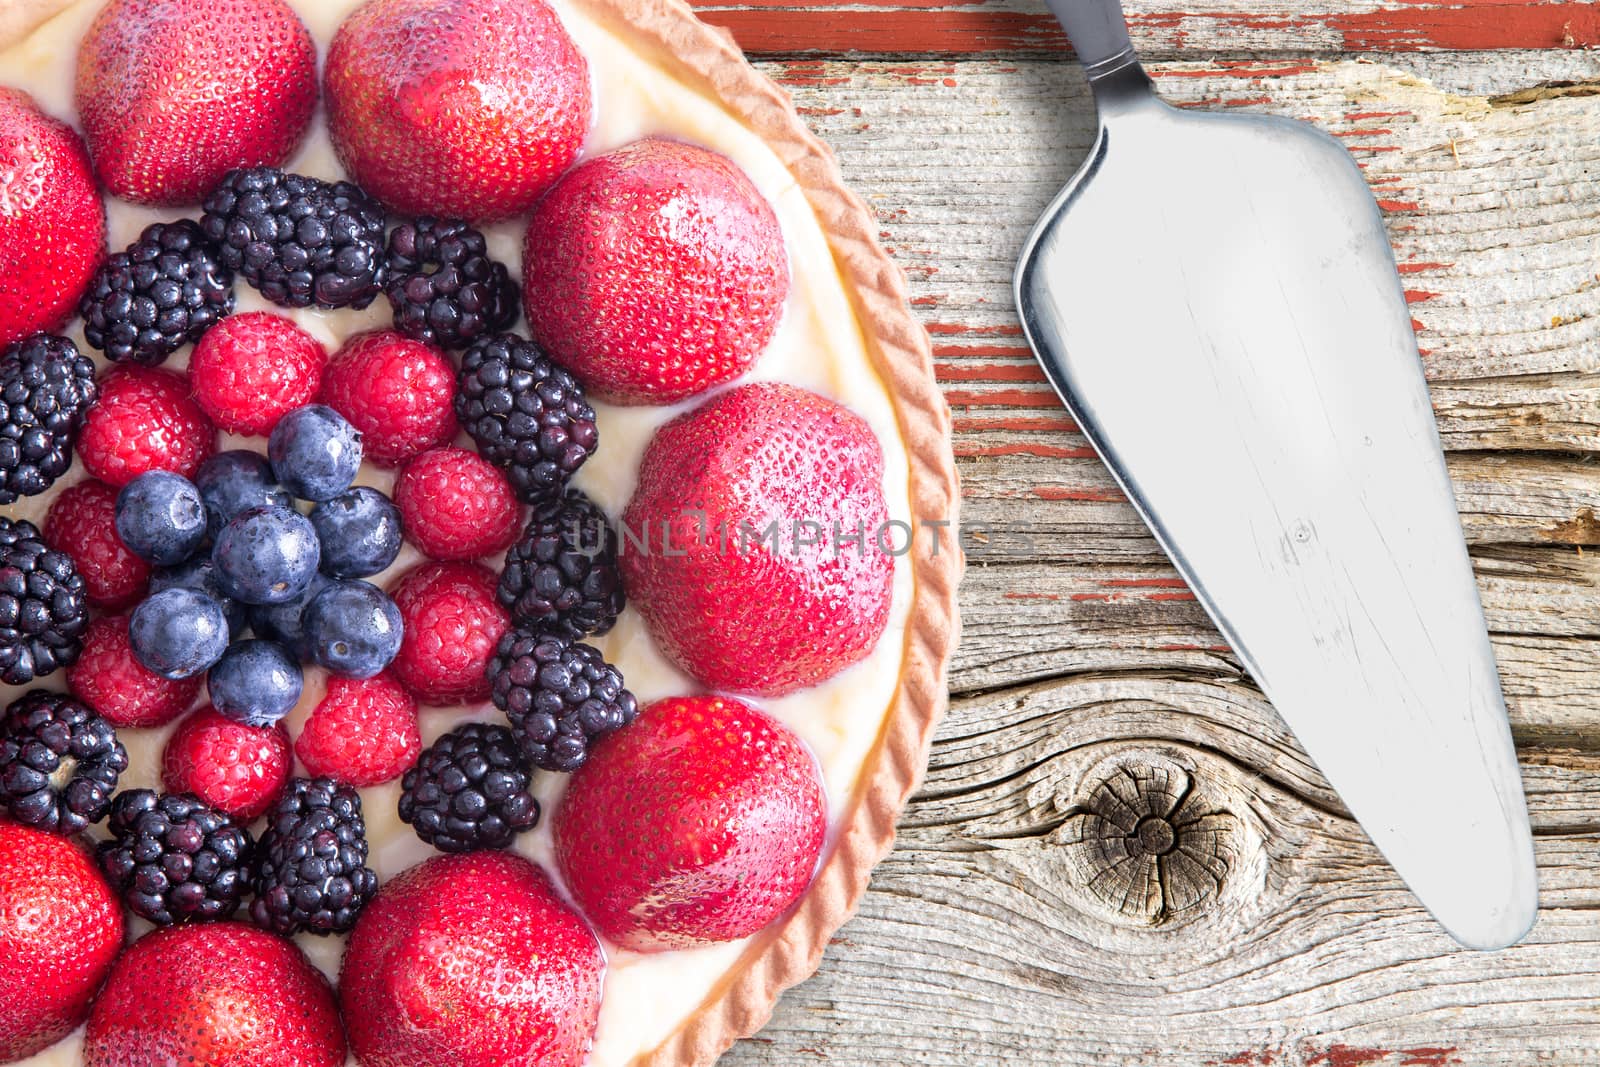 Overhead view of fresh berries homemade tart with spatula, placed on a rustic wooden table.